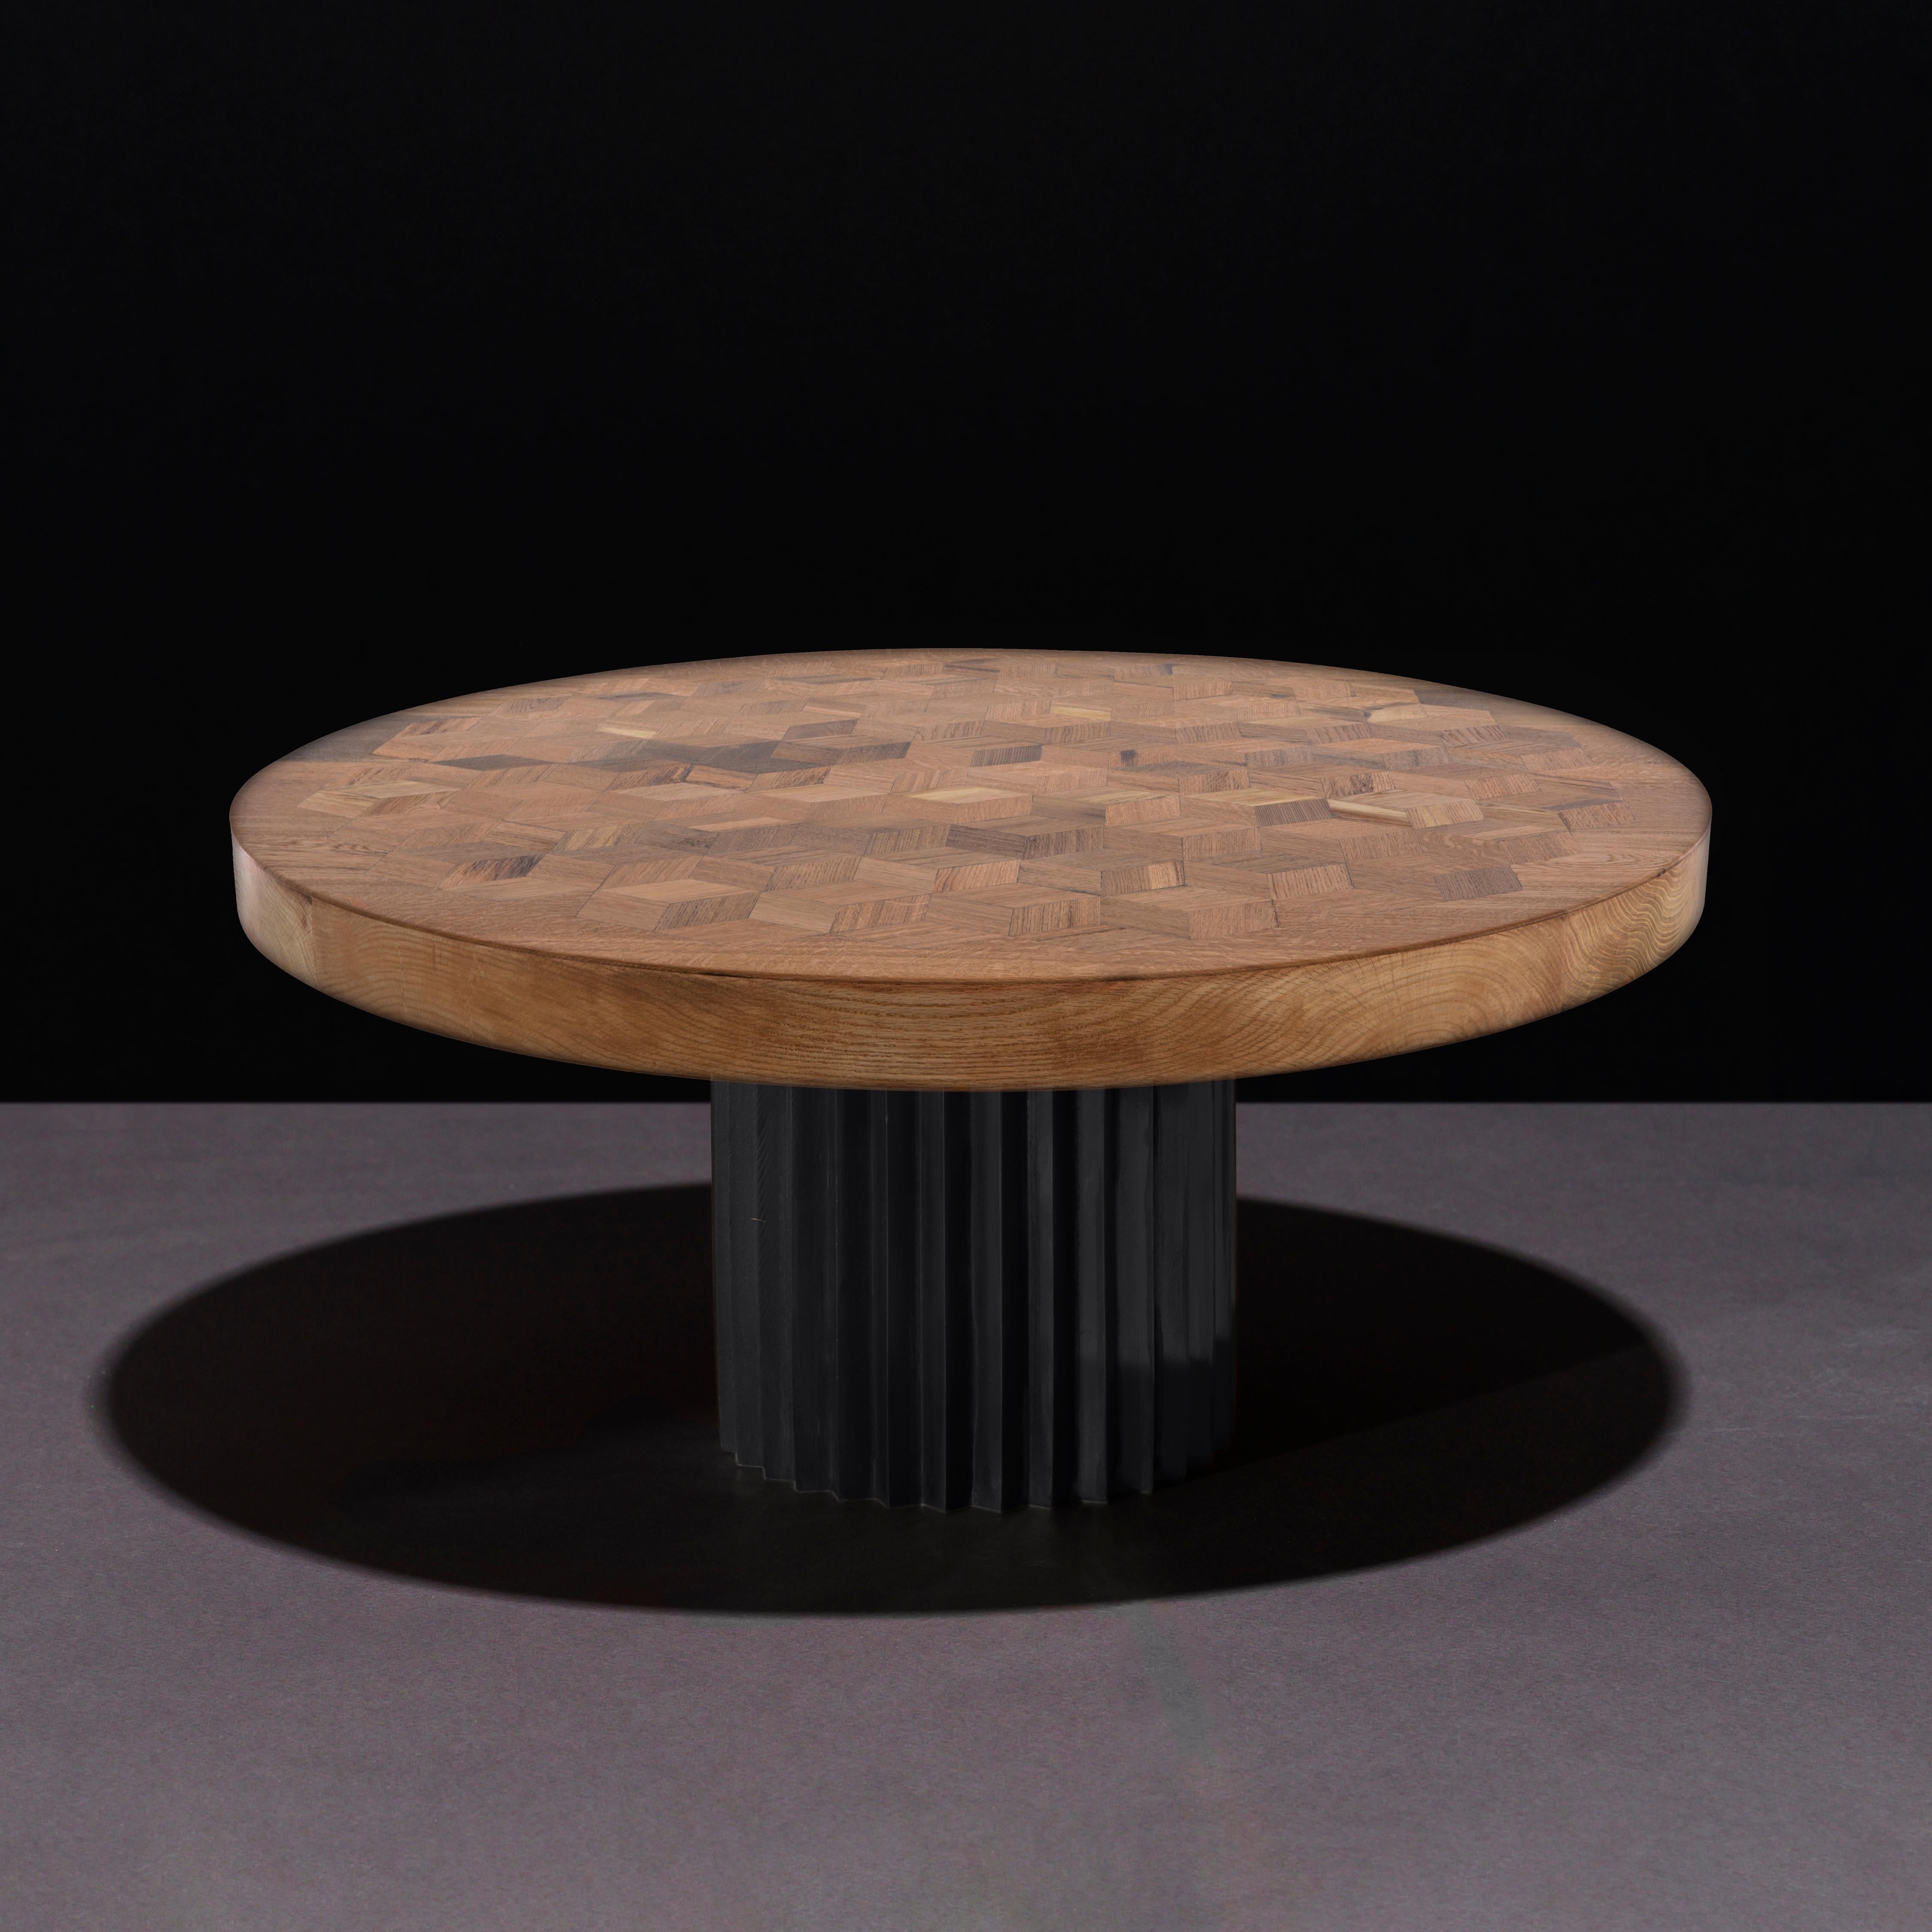 Dining or entrance table with marquetry top in reclaimed oak and multifaceted pedestal in cast blackened bronze. 

The marquetry tabletop in reclaimed Oak contains 222 rhombi cut from old Italian wine barrels. Inspired by Doric columns in archaic